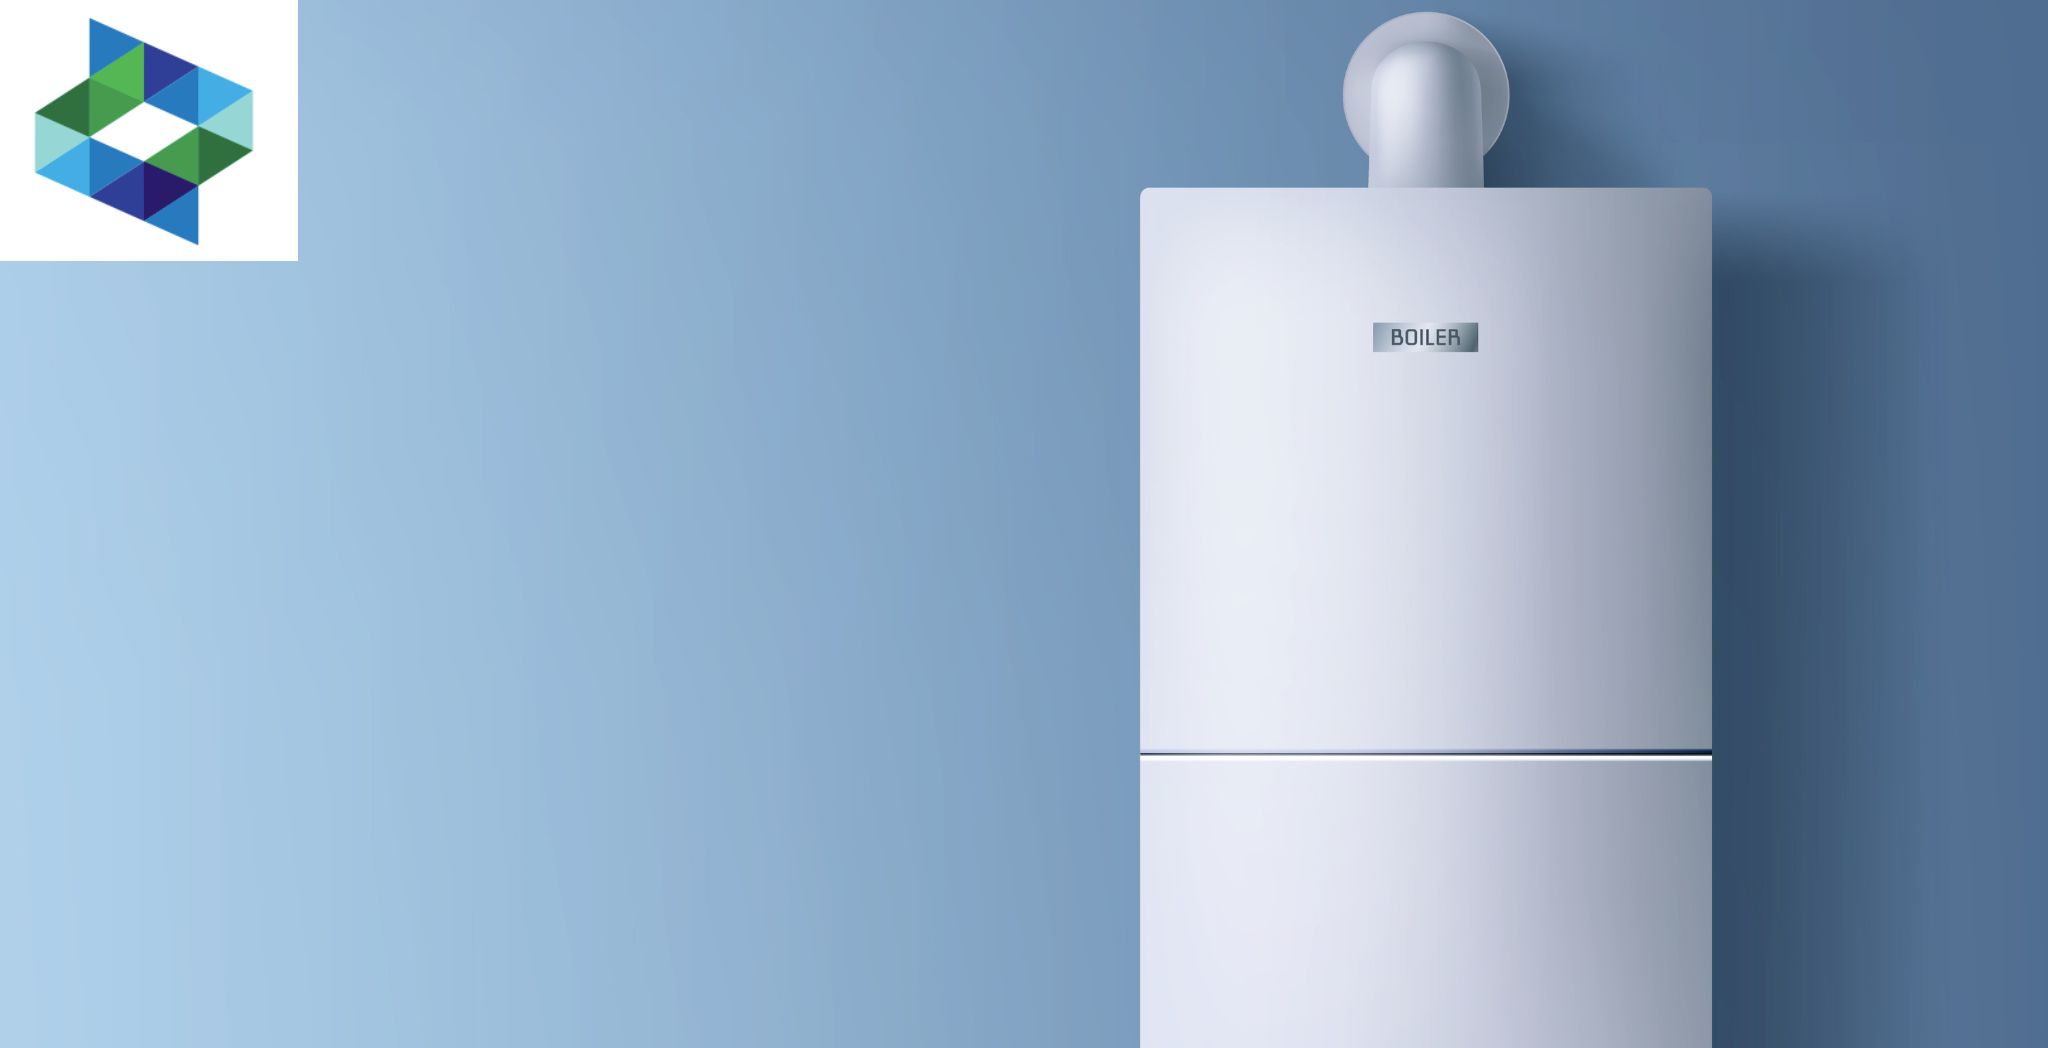 Alt Text: "A residential water heater, typically cylindrical, standing upright with pipes connected at the top. It has a metal exterior, usually painted white, with temperature control knobs and safety warnings visible. The heater is installed in a home utility area, surrounded by walls and possibly other household appliances